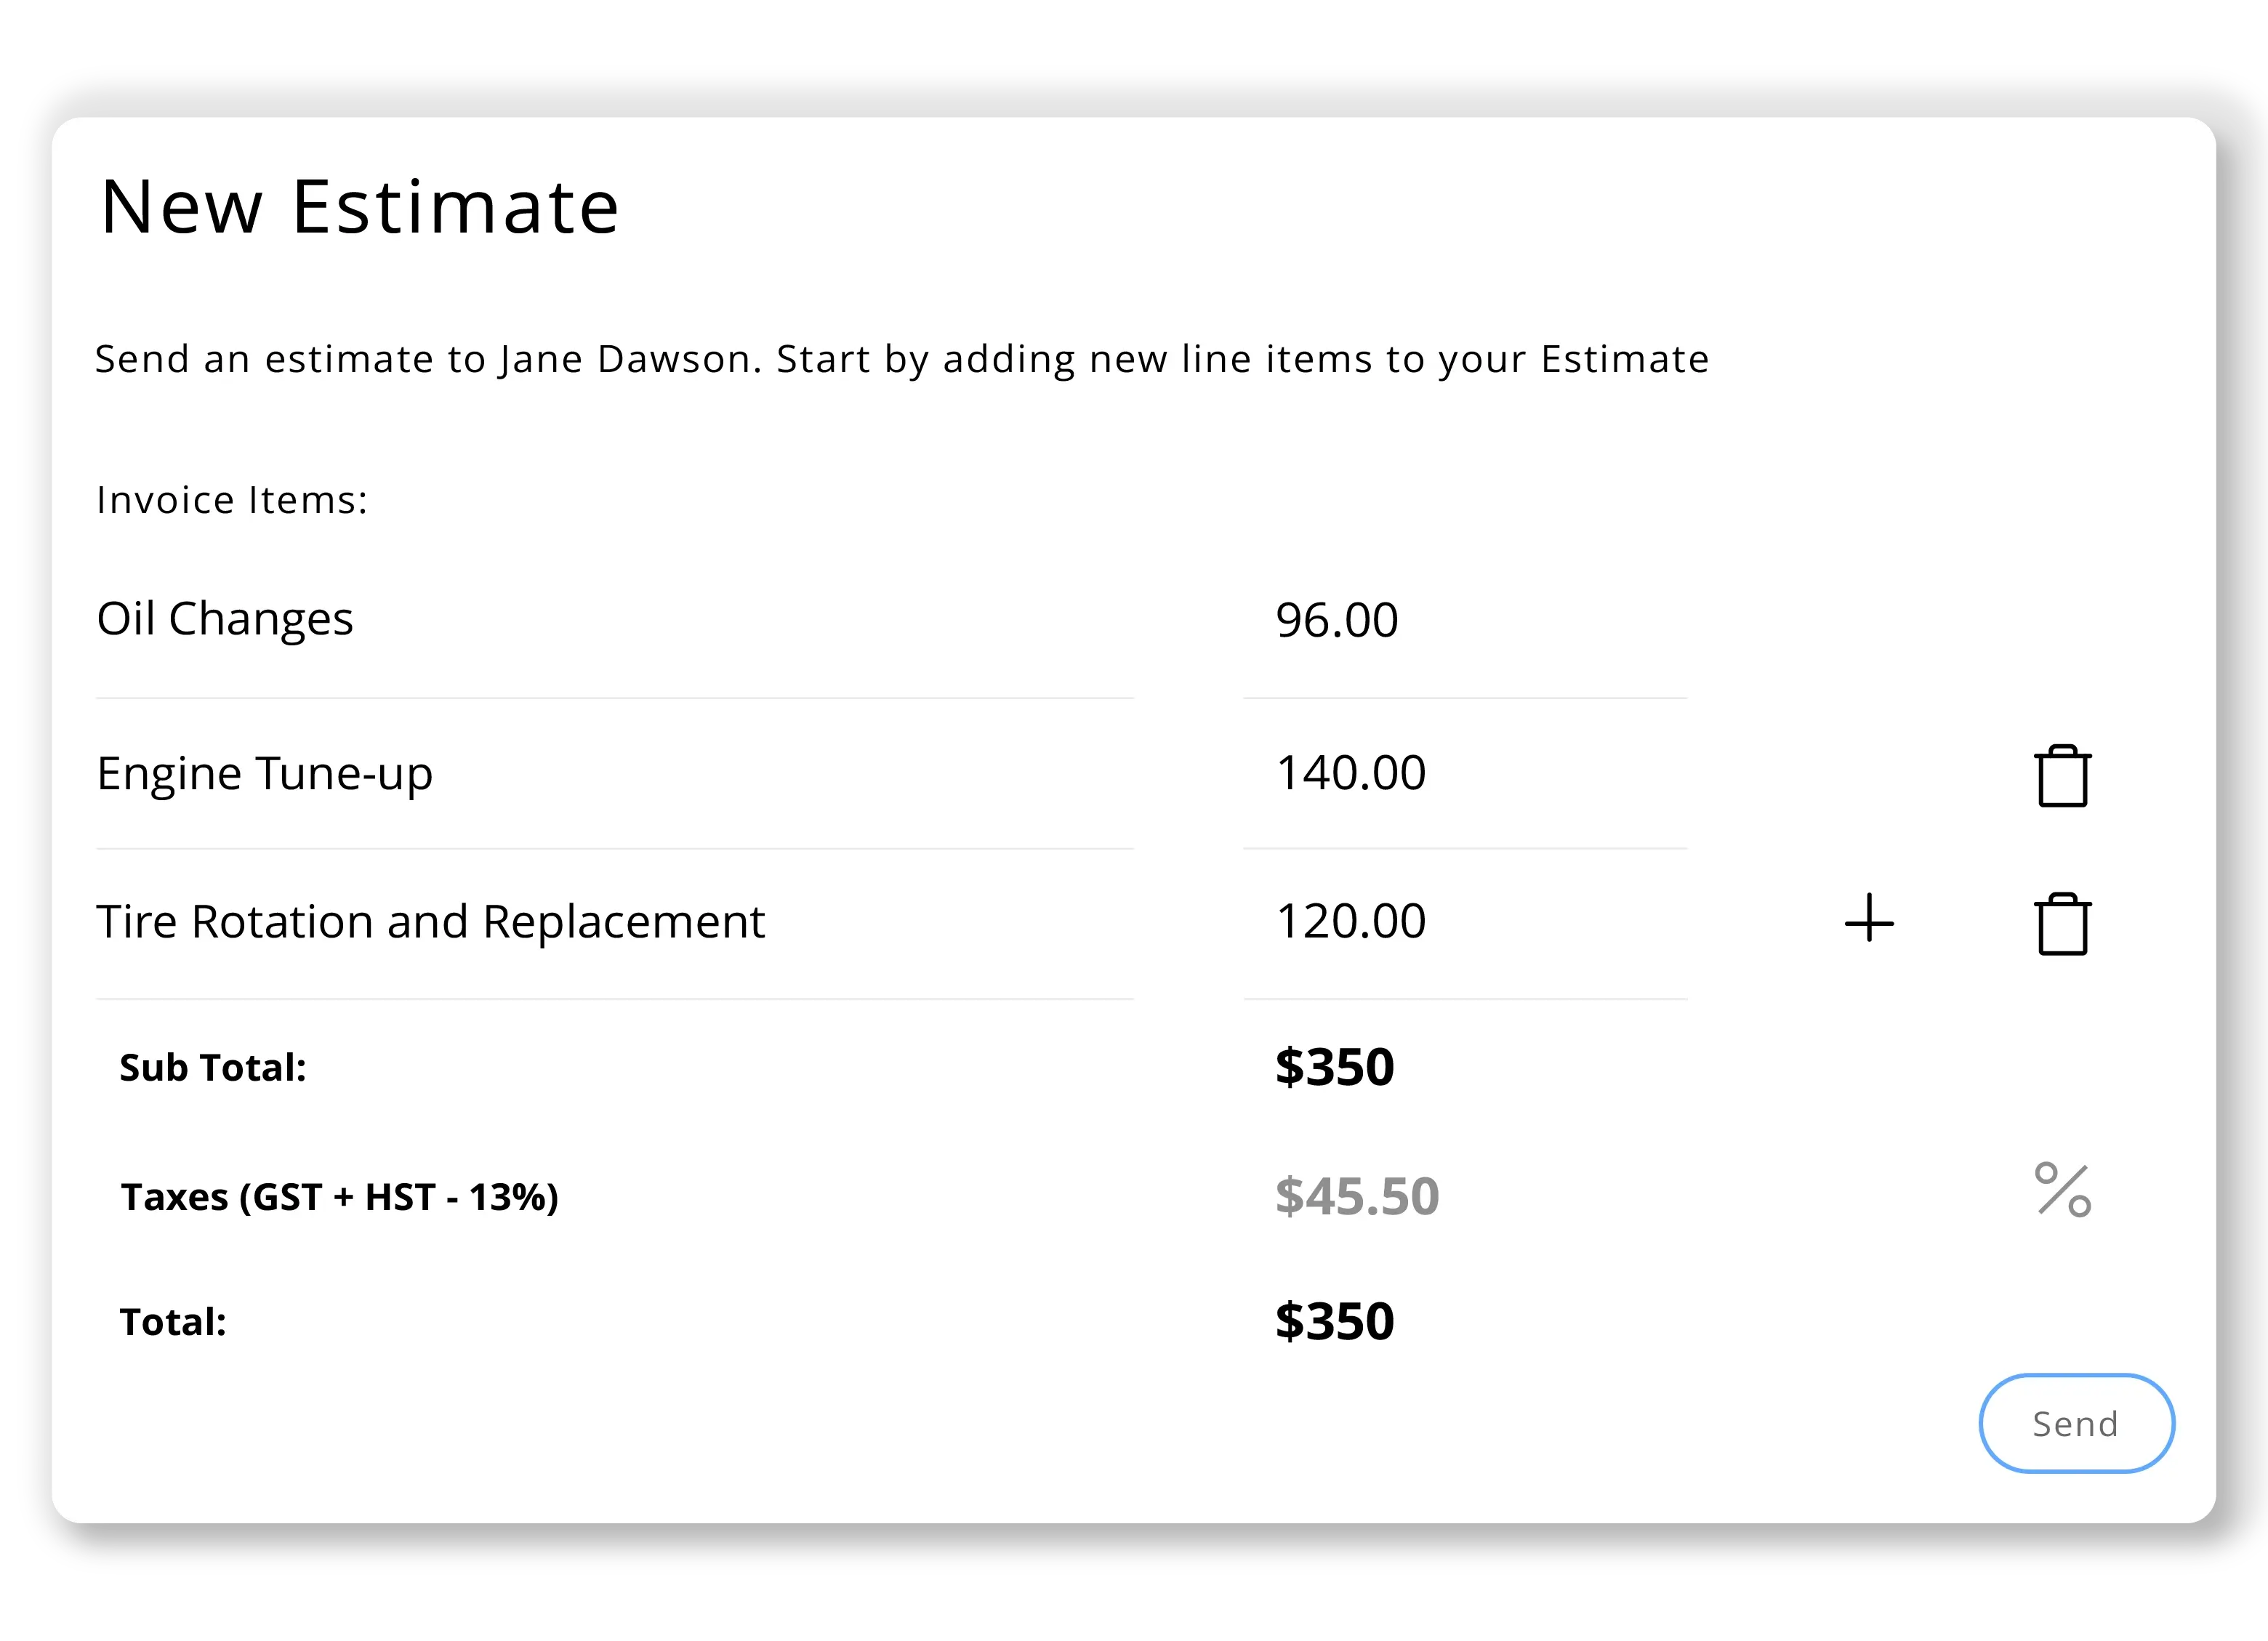 Streamline Your Quoting Process with Estimates